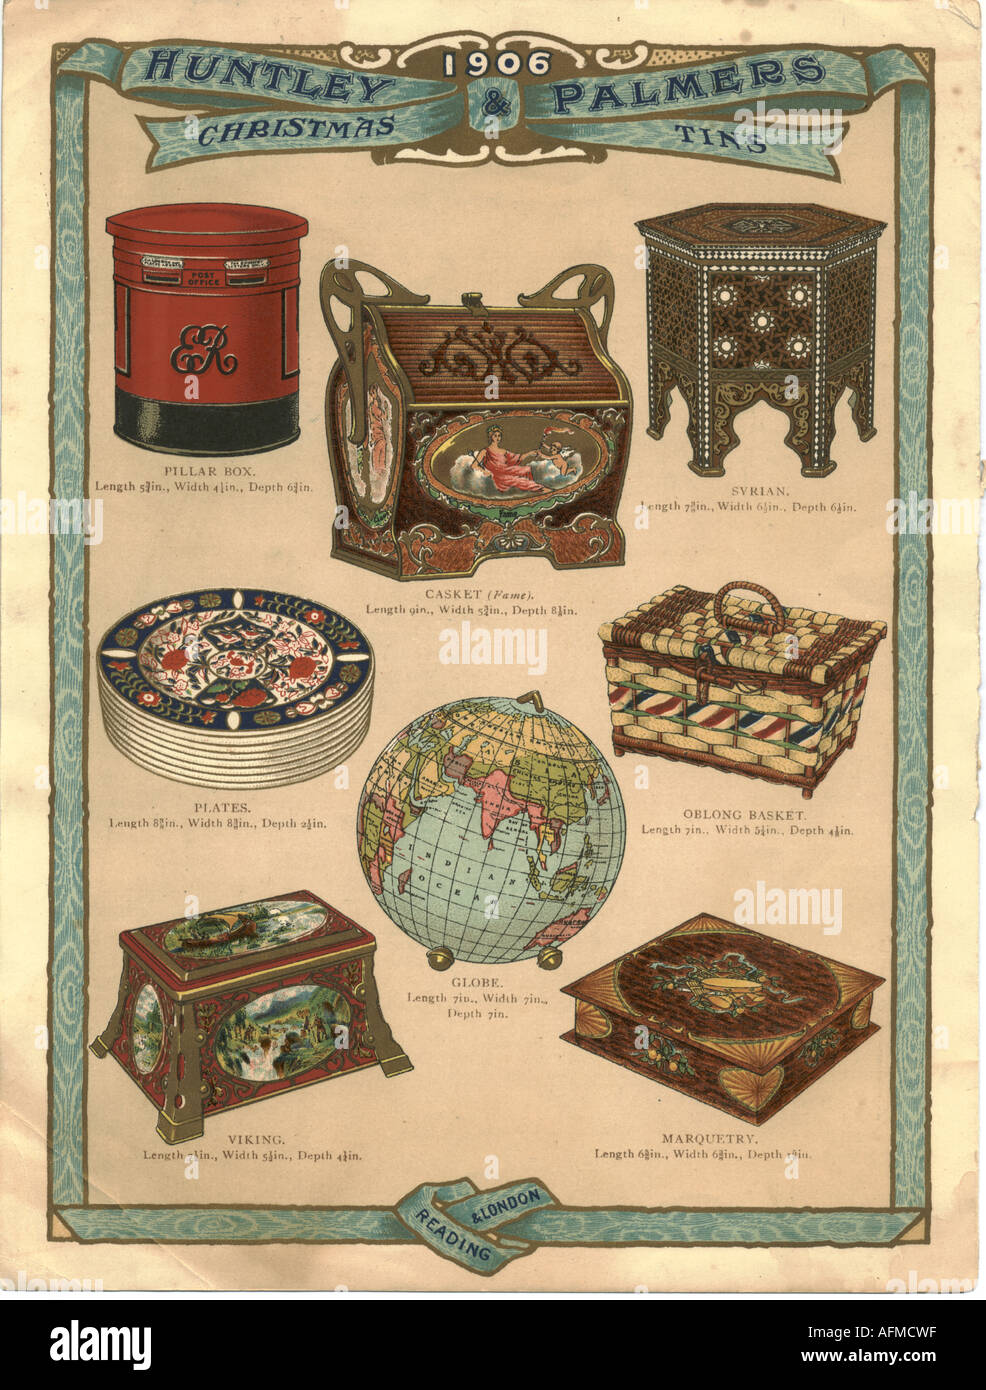 Christmas tins from Huntley & Palmers 1906 Stock Photo